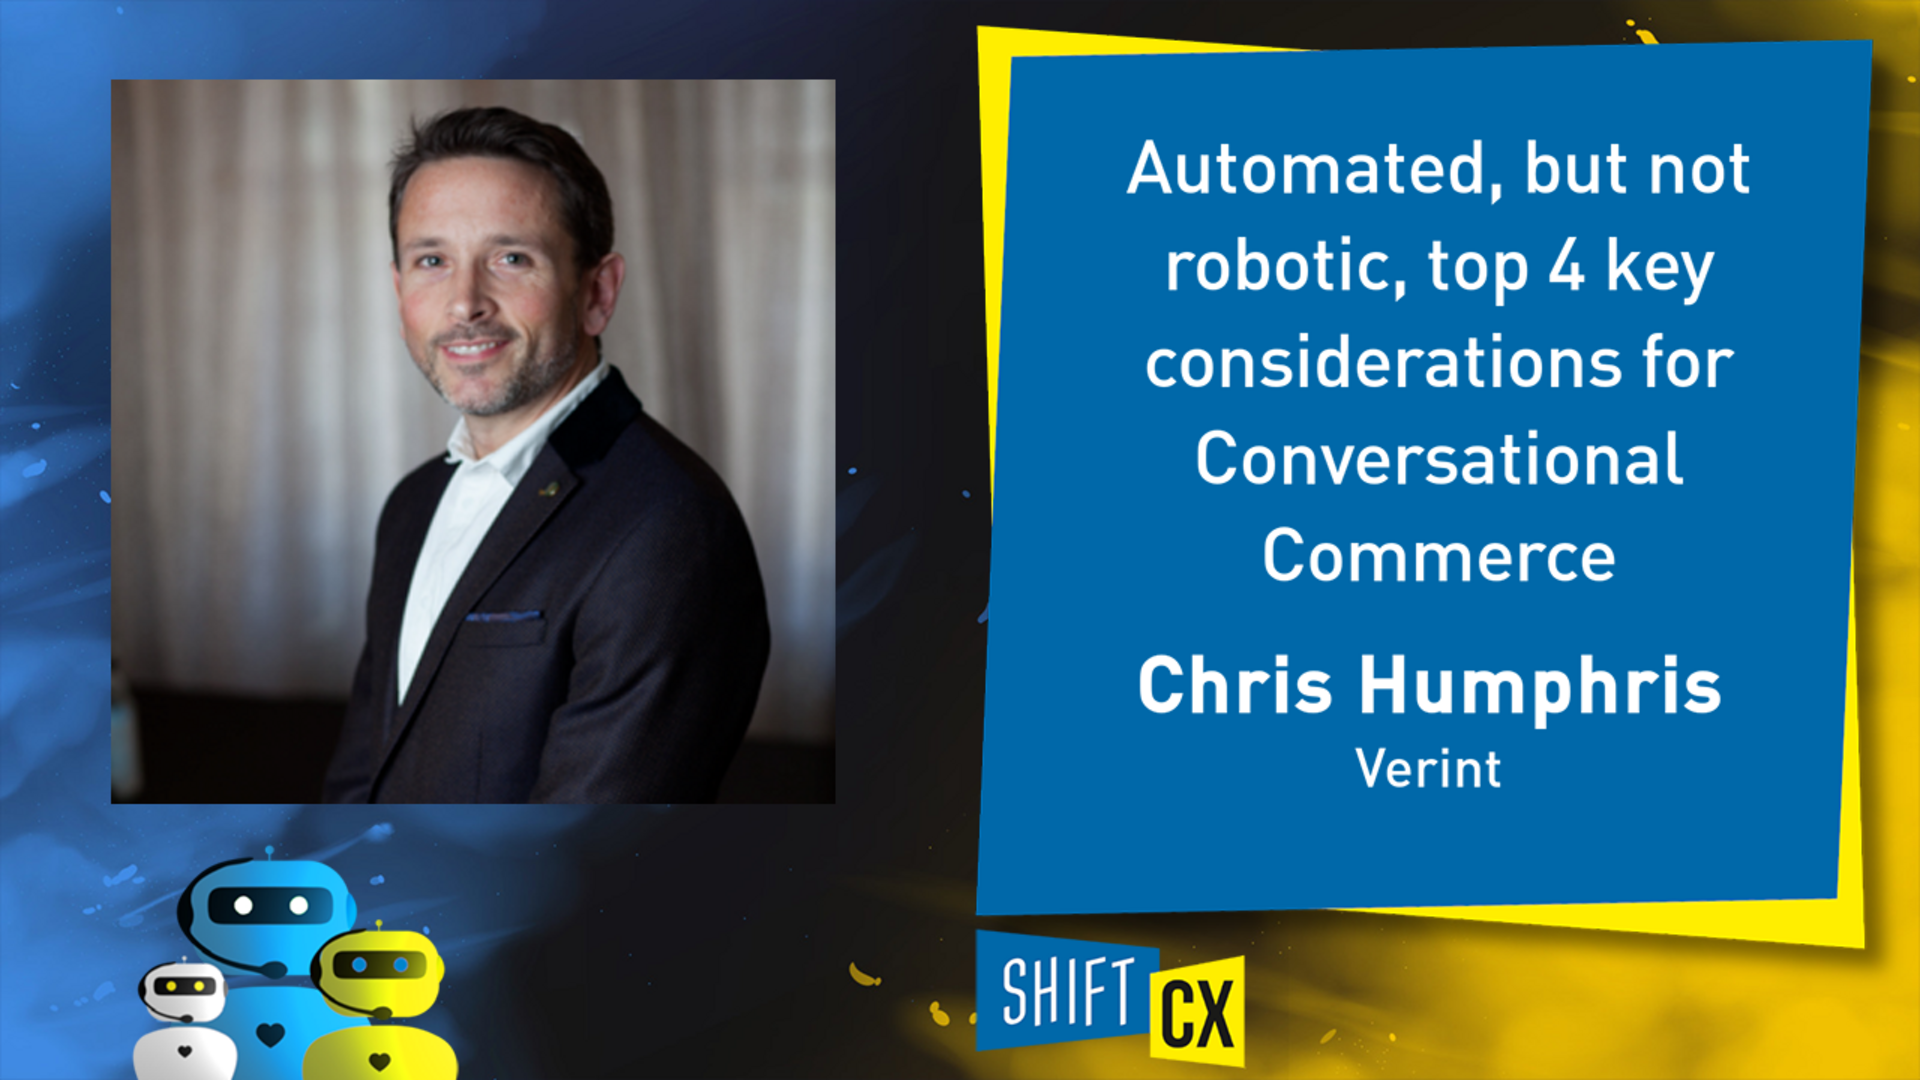 Automated, but not robotic, top 4 key considerations for Conversational Commerce